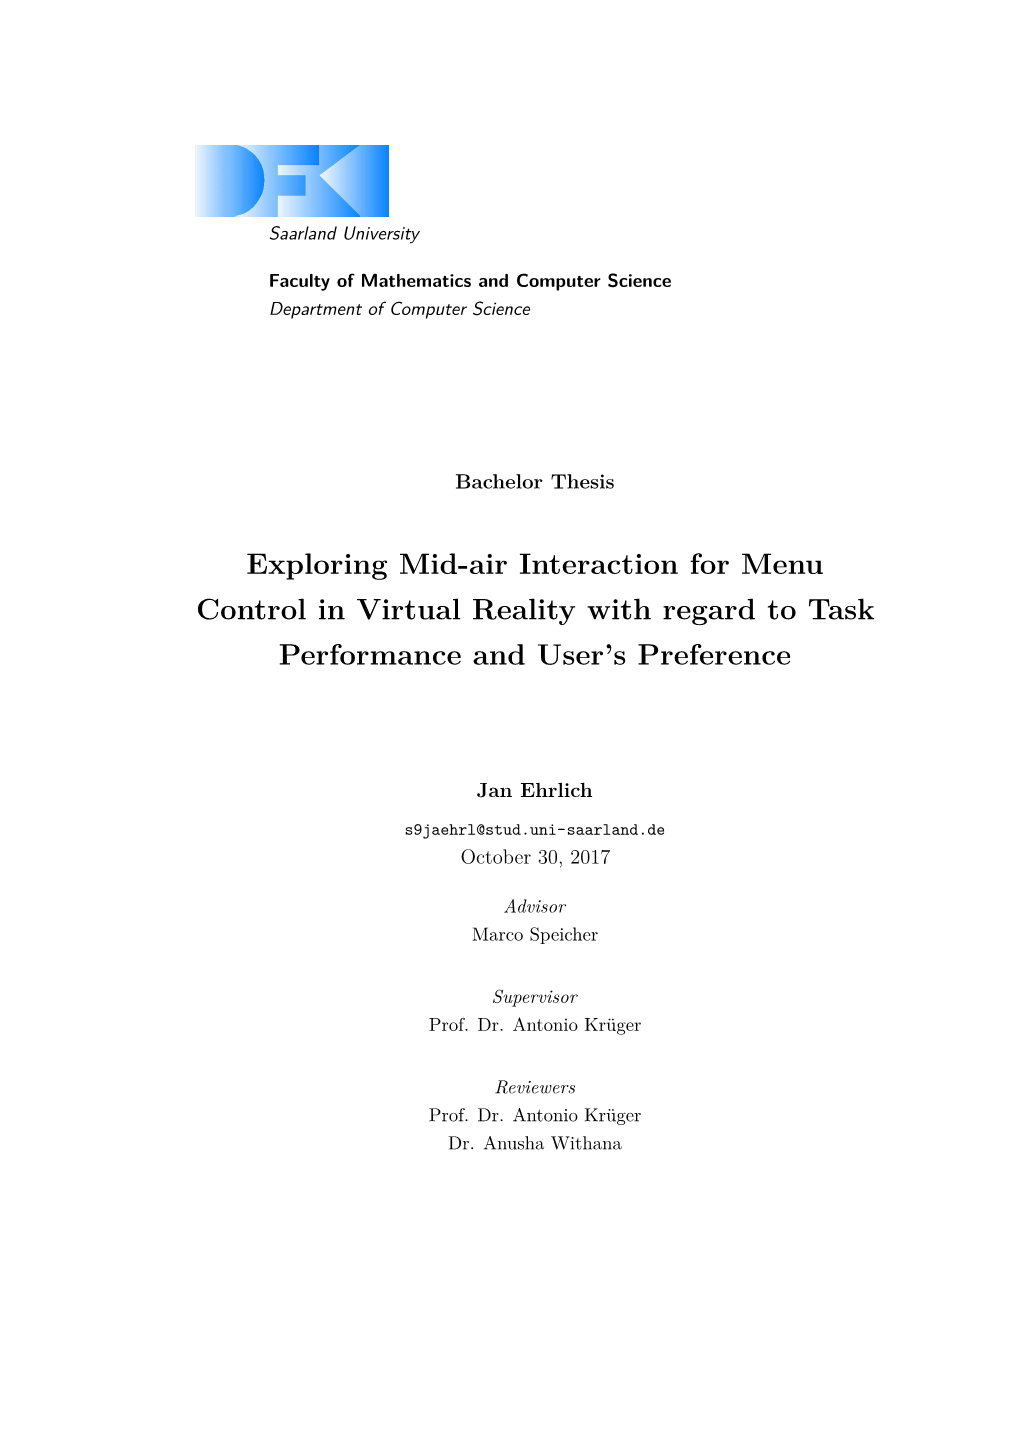 Exploring Mid-Air Interaction for Menu Control in Virtual Reality with Regard to Task Performance and User’S Preference